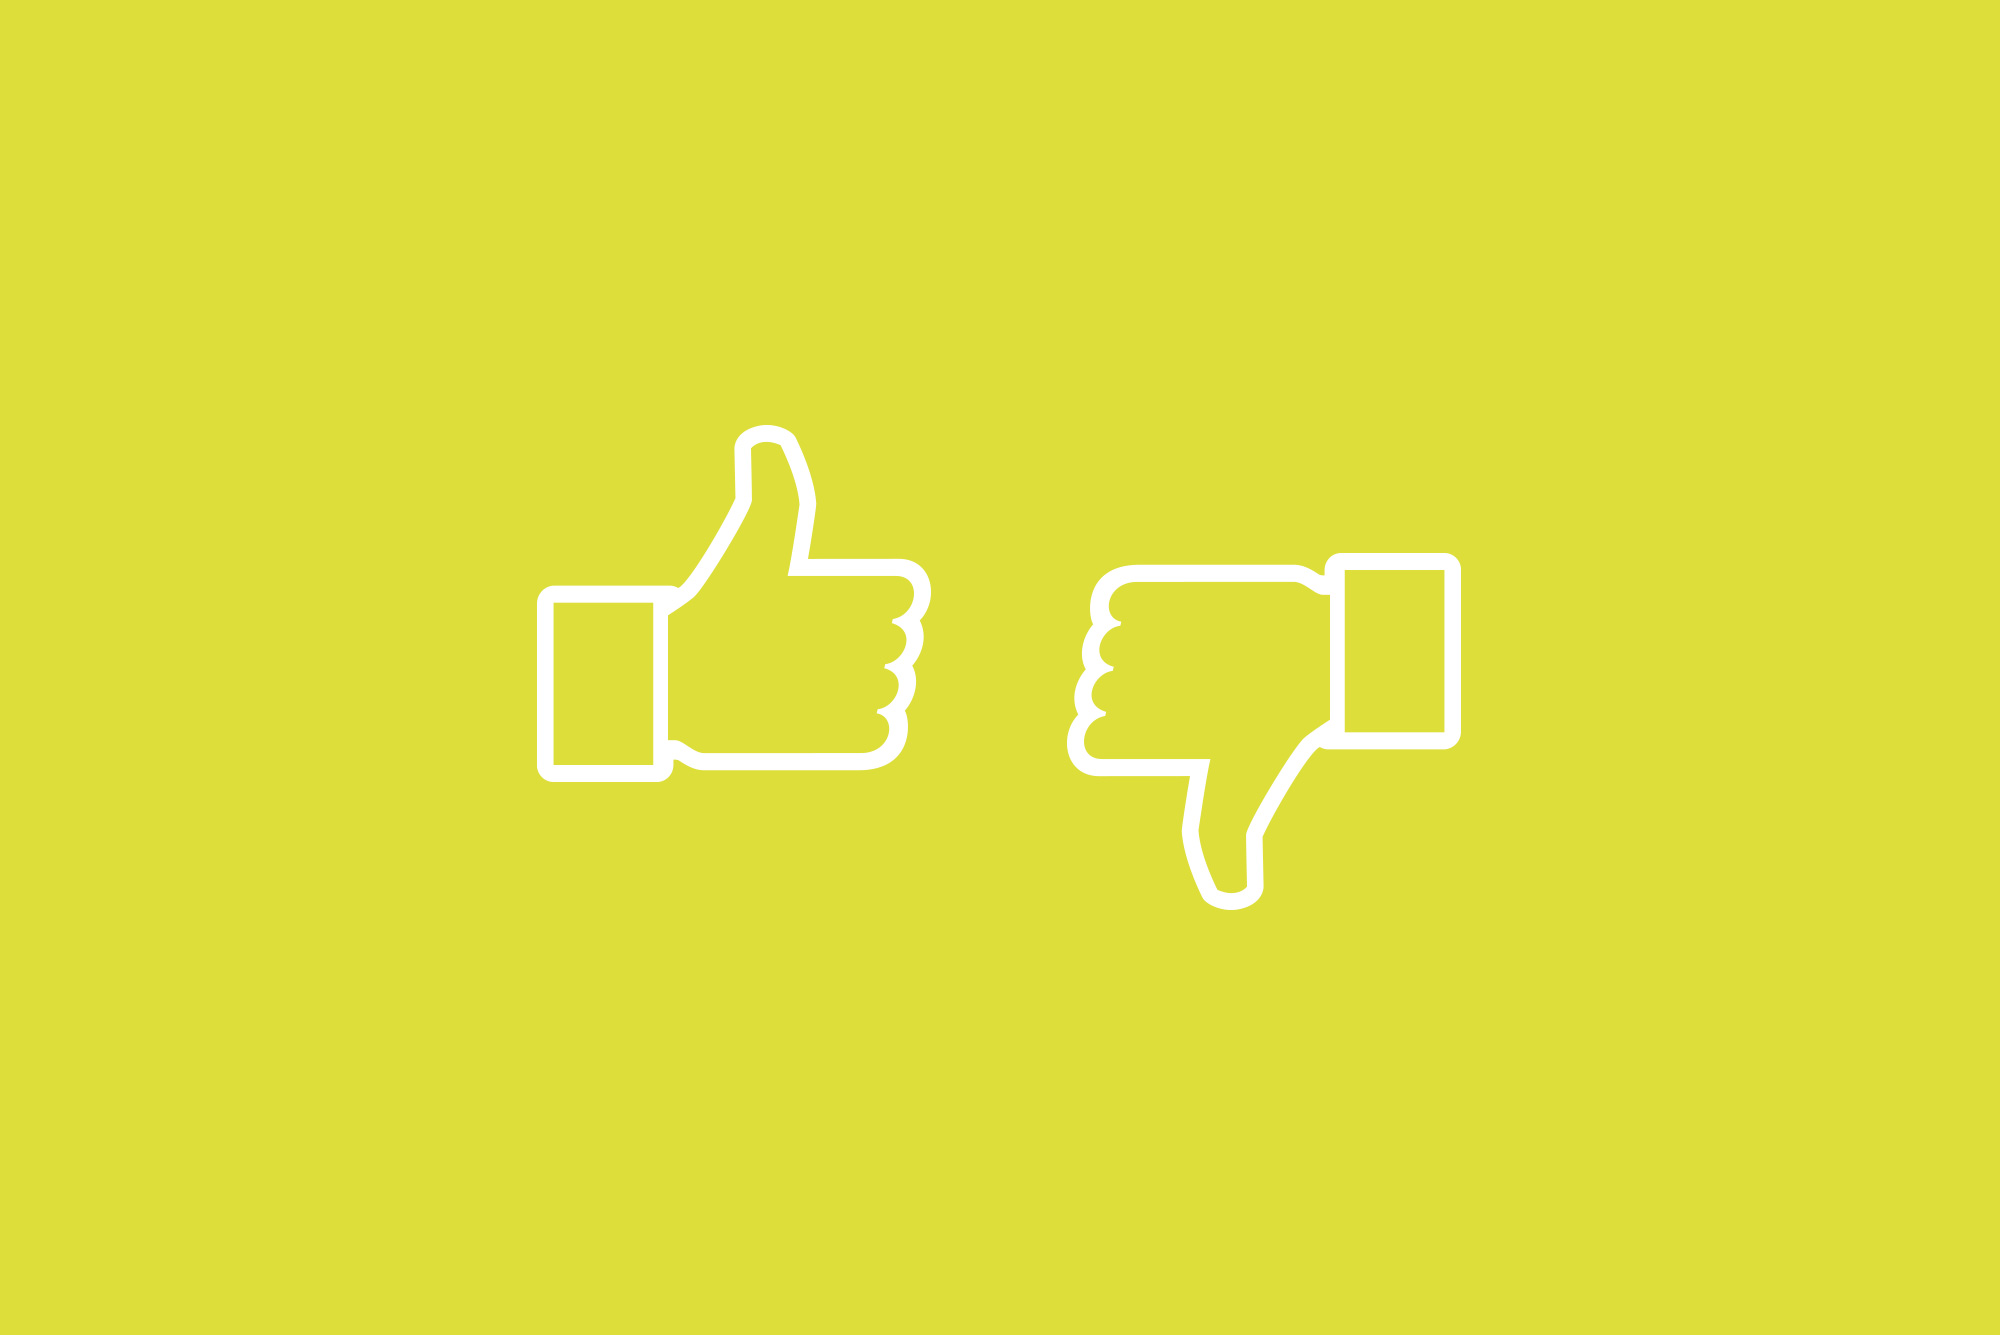 Do's and Don't of social media - a white thumbs up and thumbs down on a yellow background